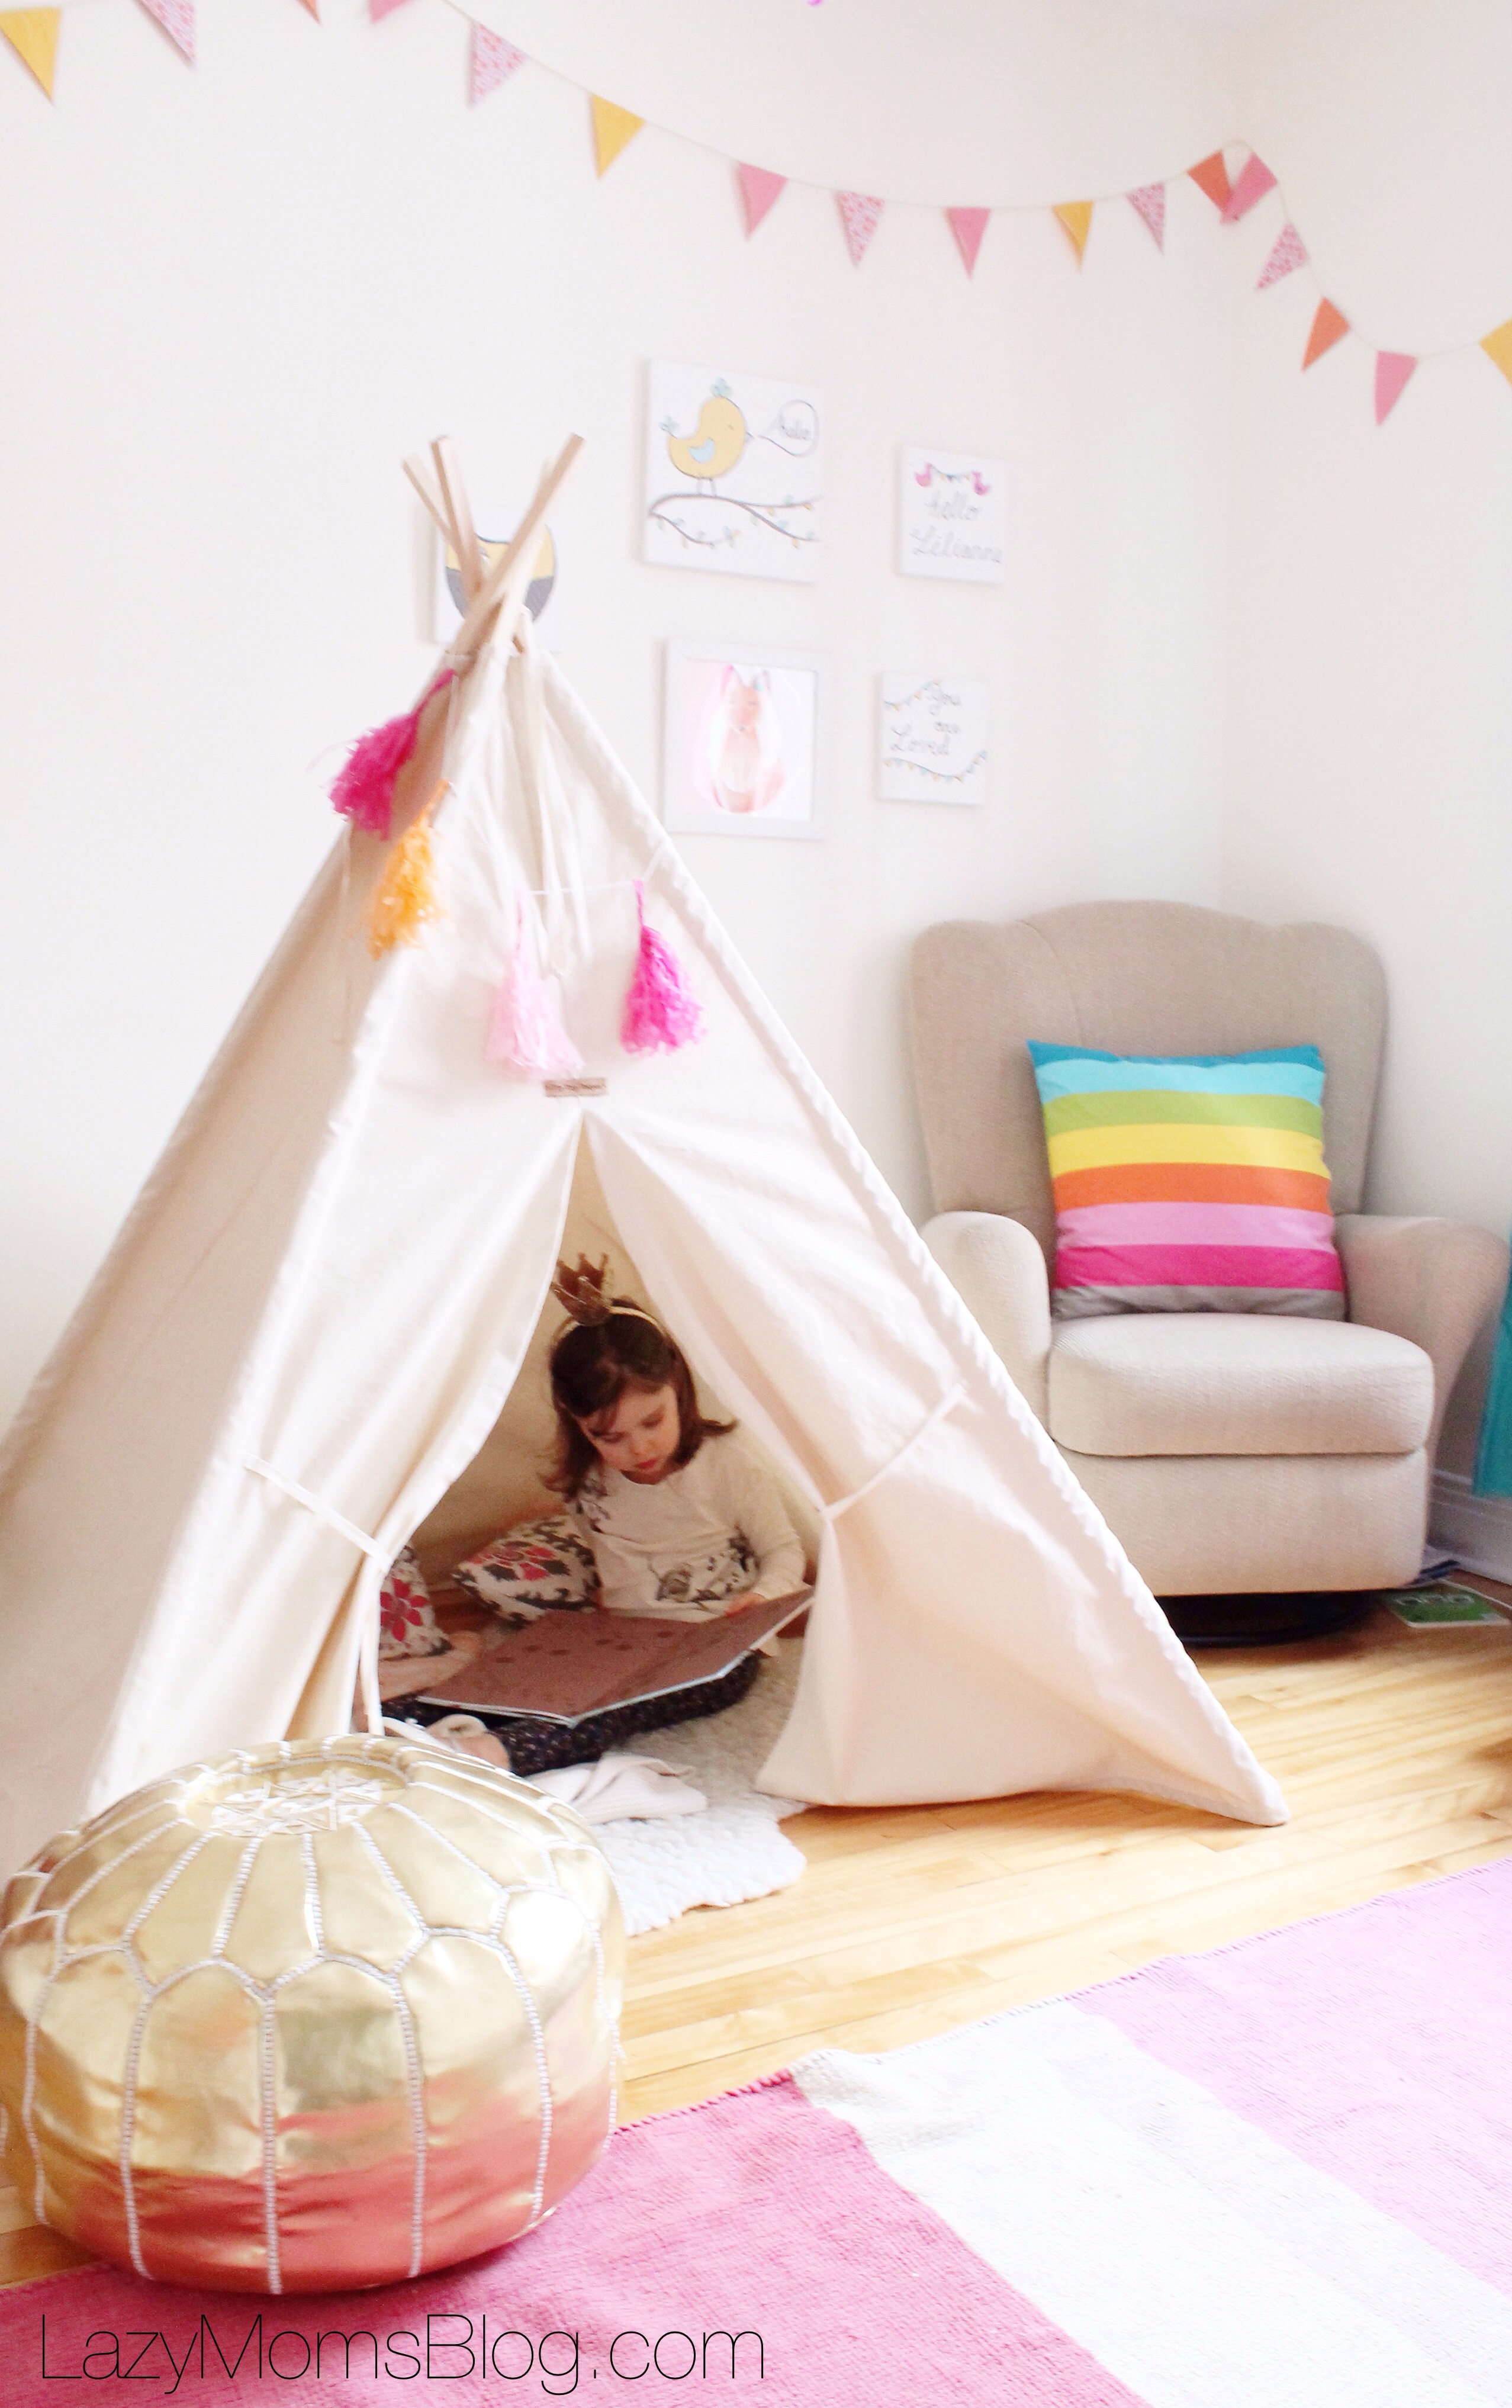 Why imaginative play is so important and how to encourage it